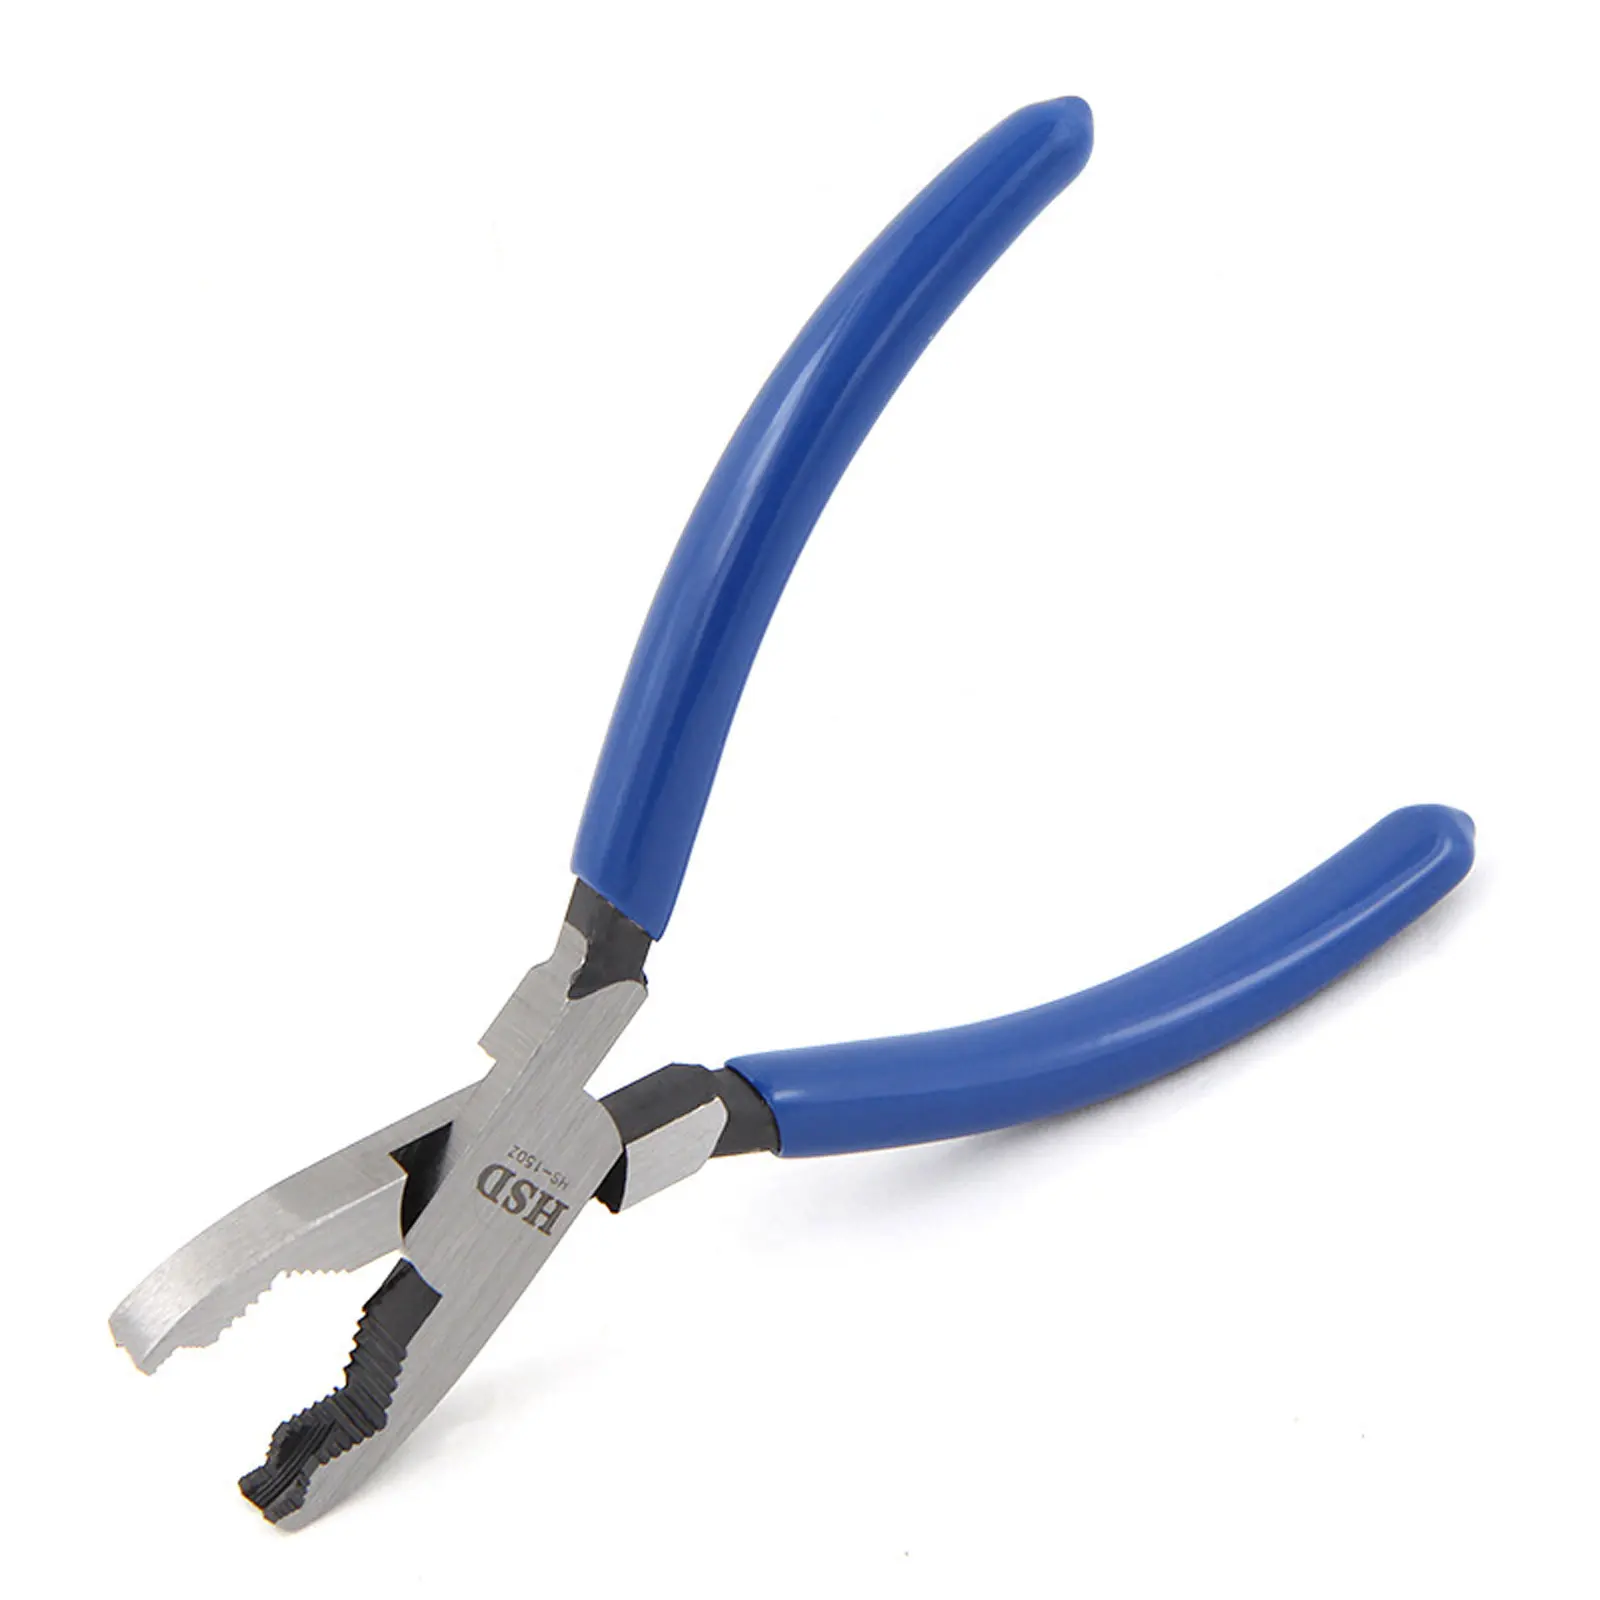 

Screw Removal / Extractor Gripping Pliers with Unique Non-Slip Jaws for Quickly Extracting Damaged / Stuck Screws Hand Tool